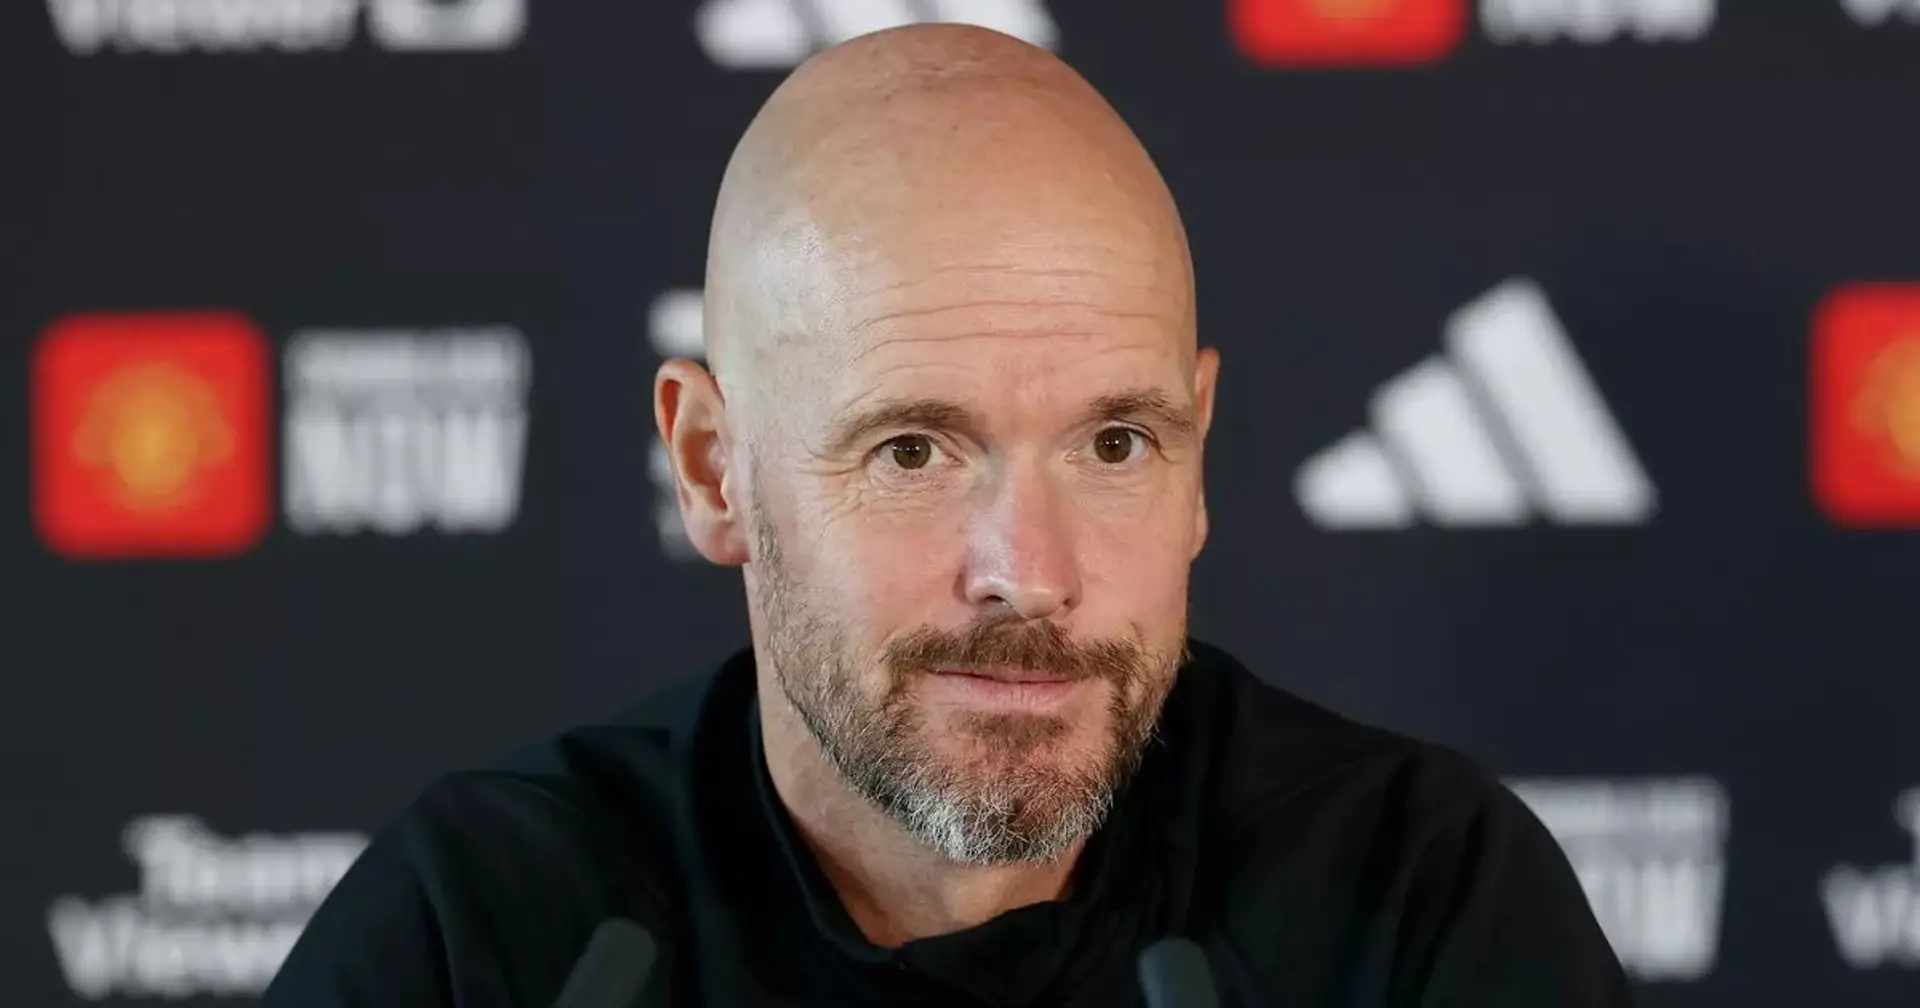 'New system absolutely worked': Ten Hag reflects on another loss to Brighton